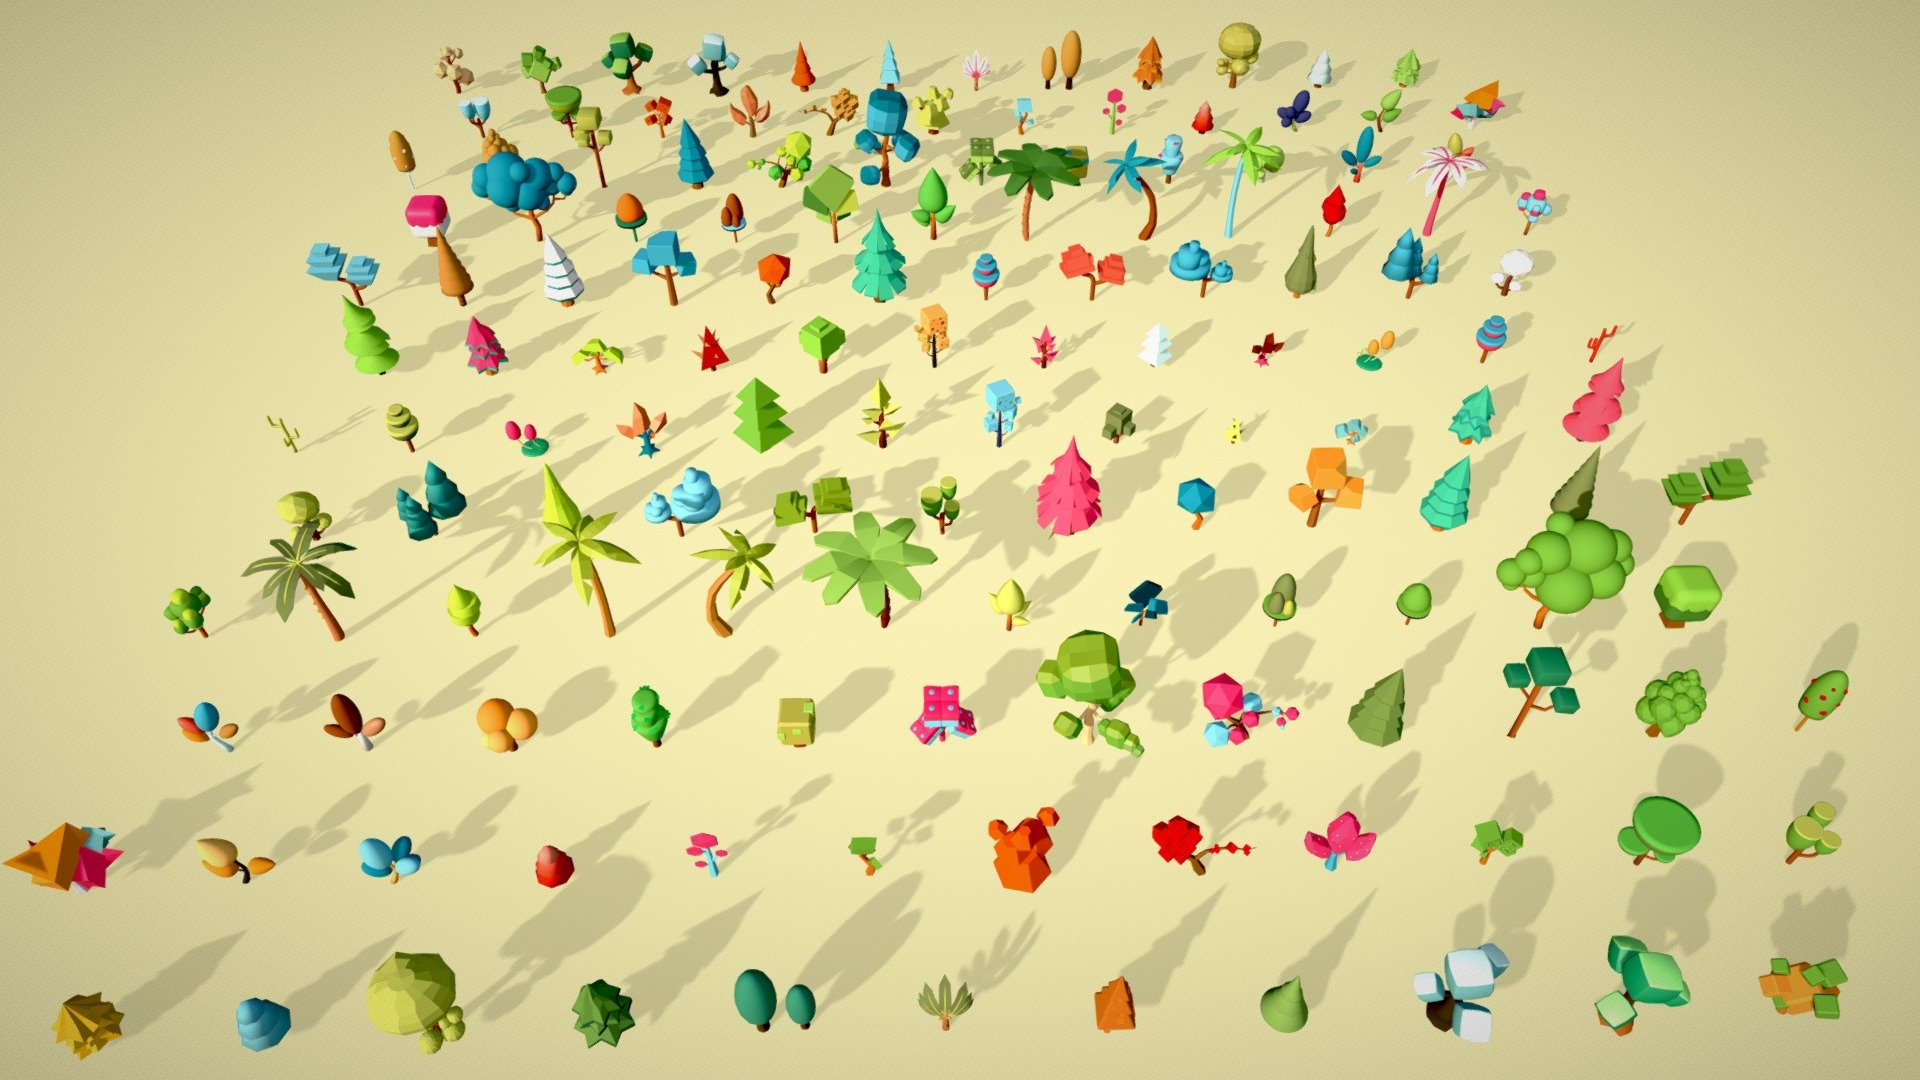 Created the great outdoors Stylized Low Poly Trees Pack!

This pack includes a variety of well-designed, low-poly 144 trees. All the models are originally modeled in a blender. This pack contains all types of trees which are suitable for every seasonal environment like winter, autumn, spring, summer, monsoon, day, night, etc.

The low poly cartoon-style trees give an amazing environmental look that can be used in hyper games, animations, advertisements, showpieces, and much more. Easy to integrate into any 3D project.
Whether you’re a game developer, animator, or graphic designer, these trees are the perfect

What are you waiting for? Let's get your 3D Stylized Low Poly Trees Pack. Please add the comments below if you like them 3d model